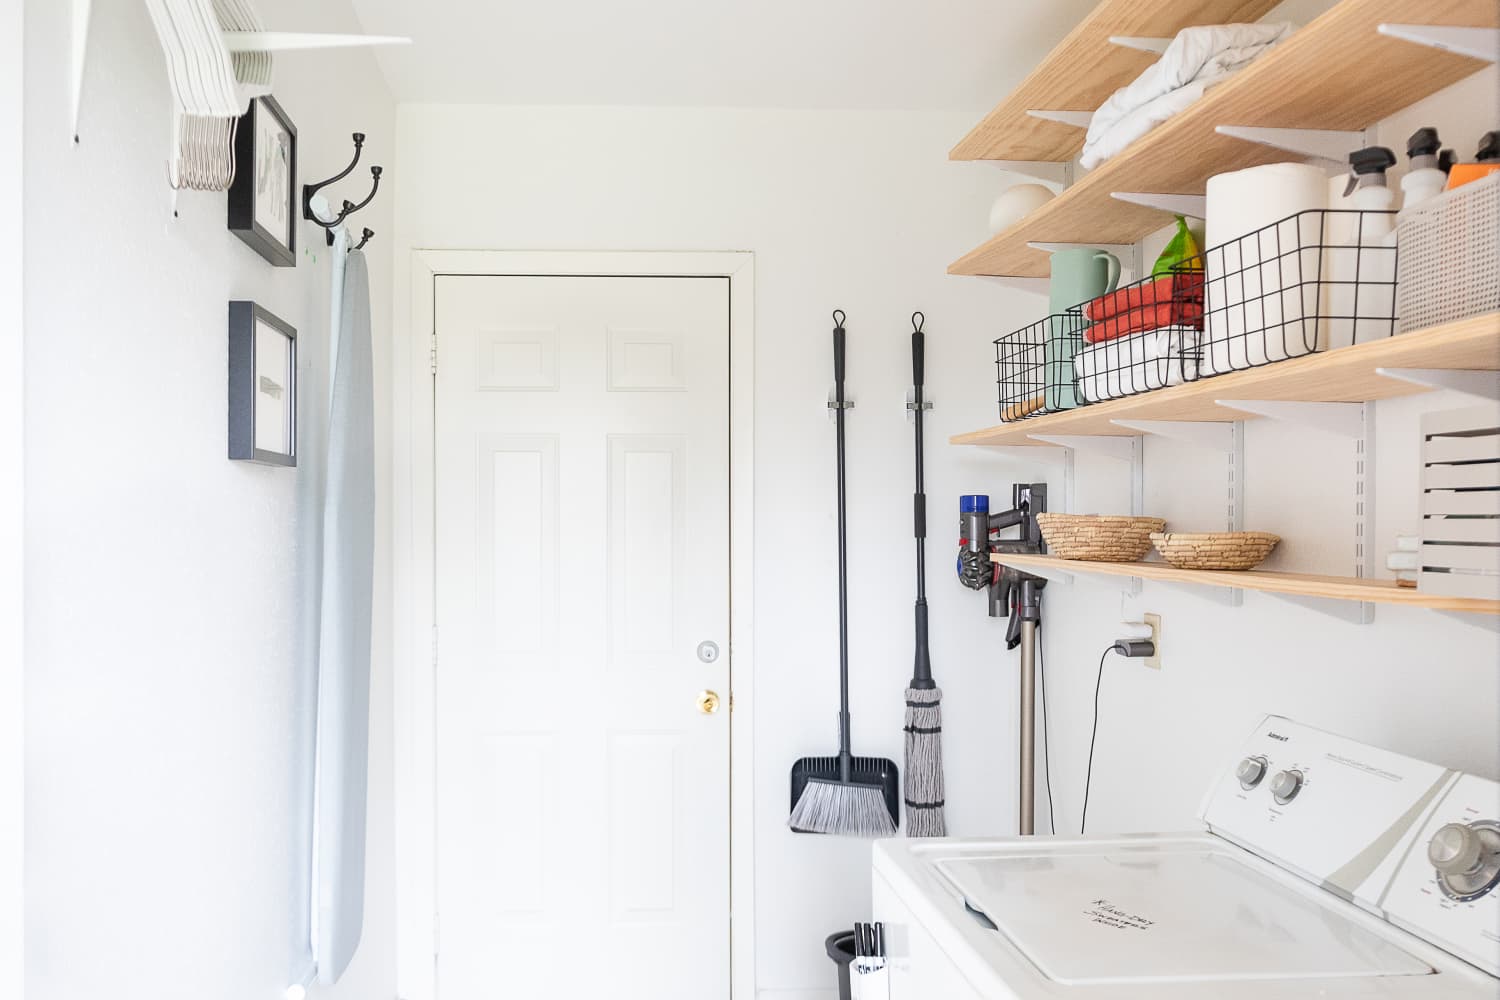 5 Hacks That’ll Instantly Make Your Laundry Room More Functional, According to Pro Organizers